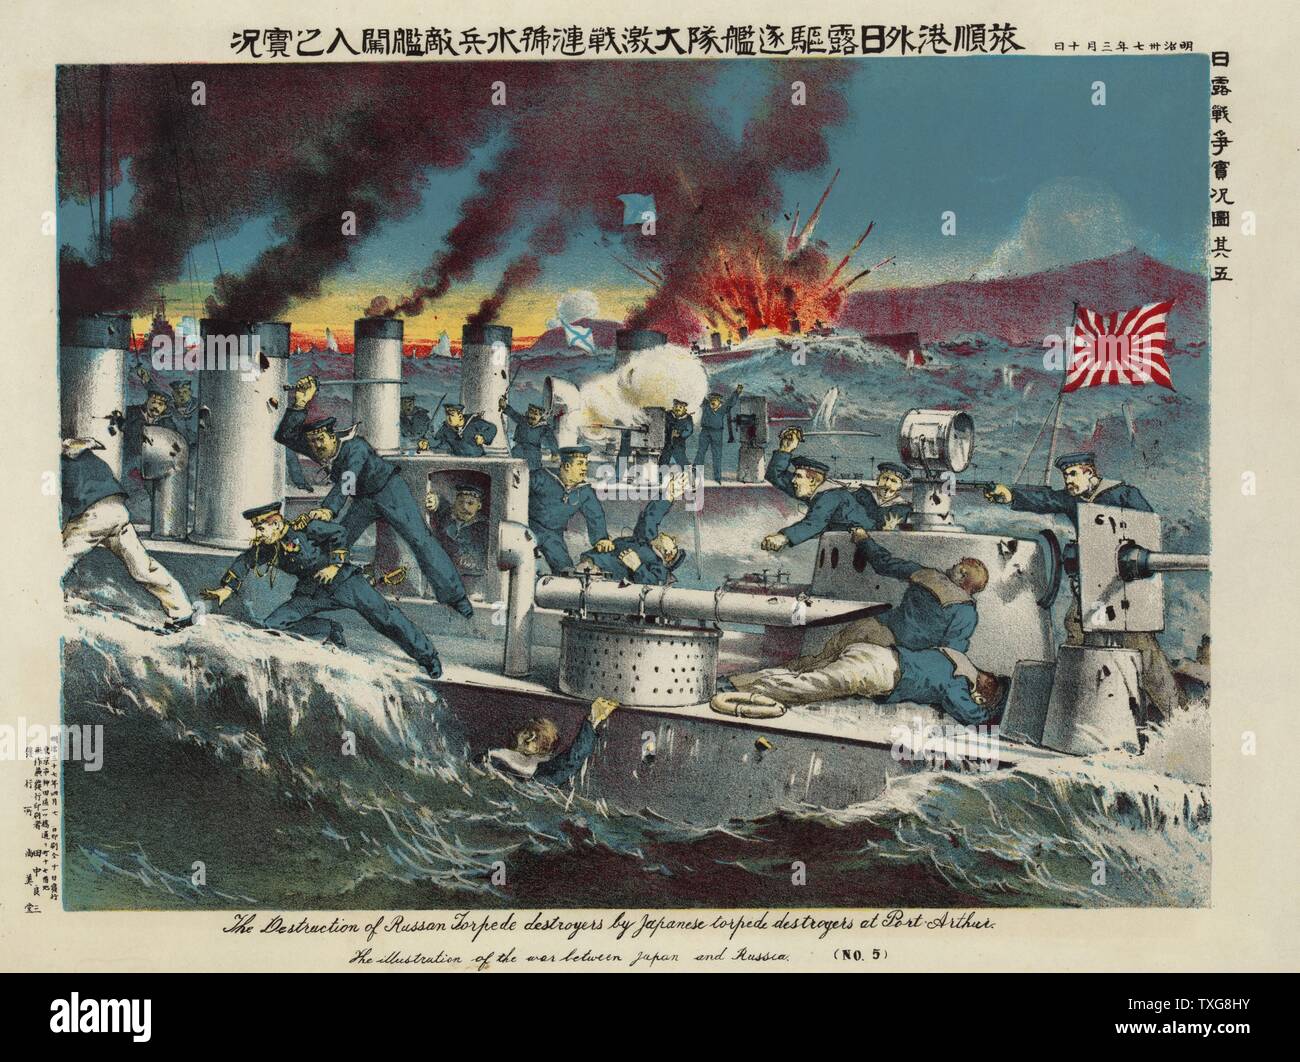 Russo-Japanese War 1904-1905 : The destruction of Russian torpedo boats by Japanese torpedo boats at the Battle of Port Arthur, February 1904 Chromolithograph  Naval Warfare Hand-to-Hand Fightin Stock Photo